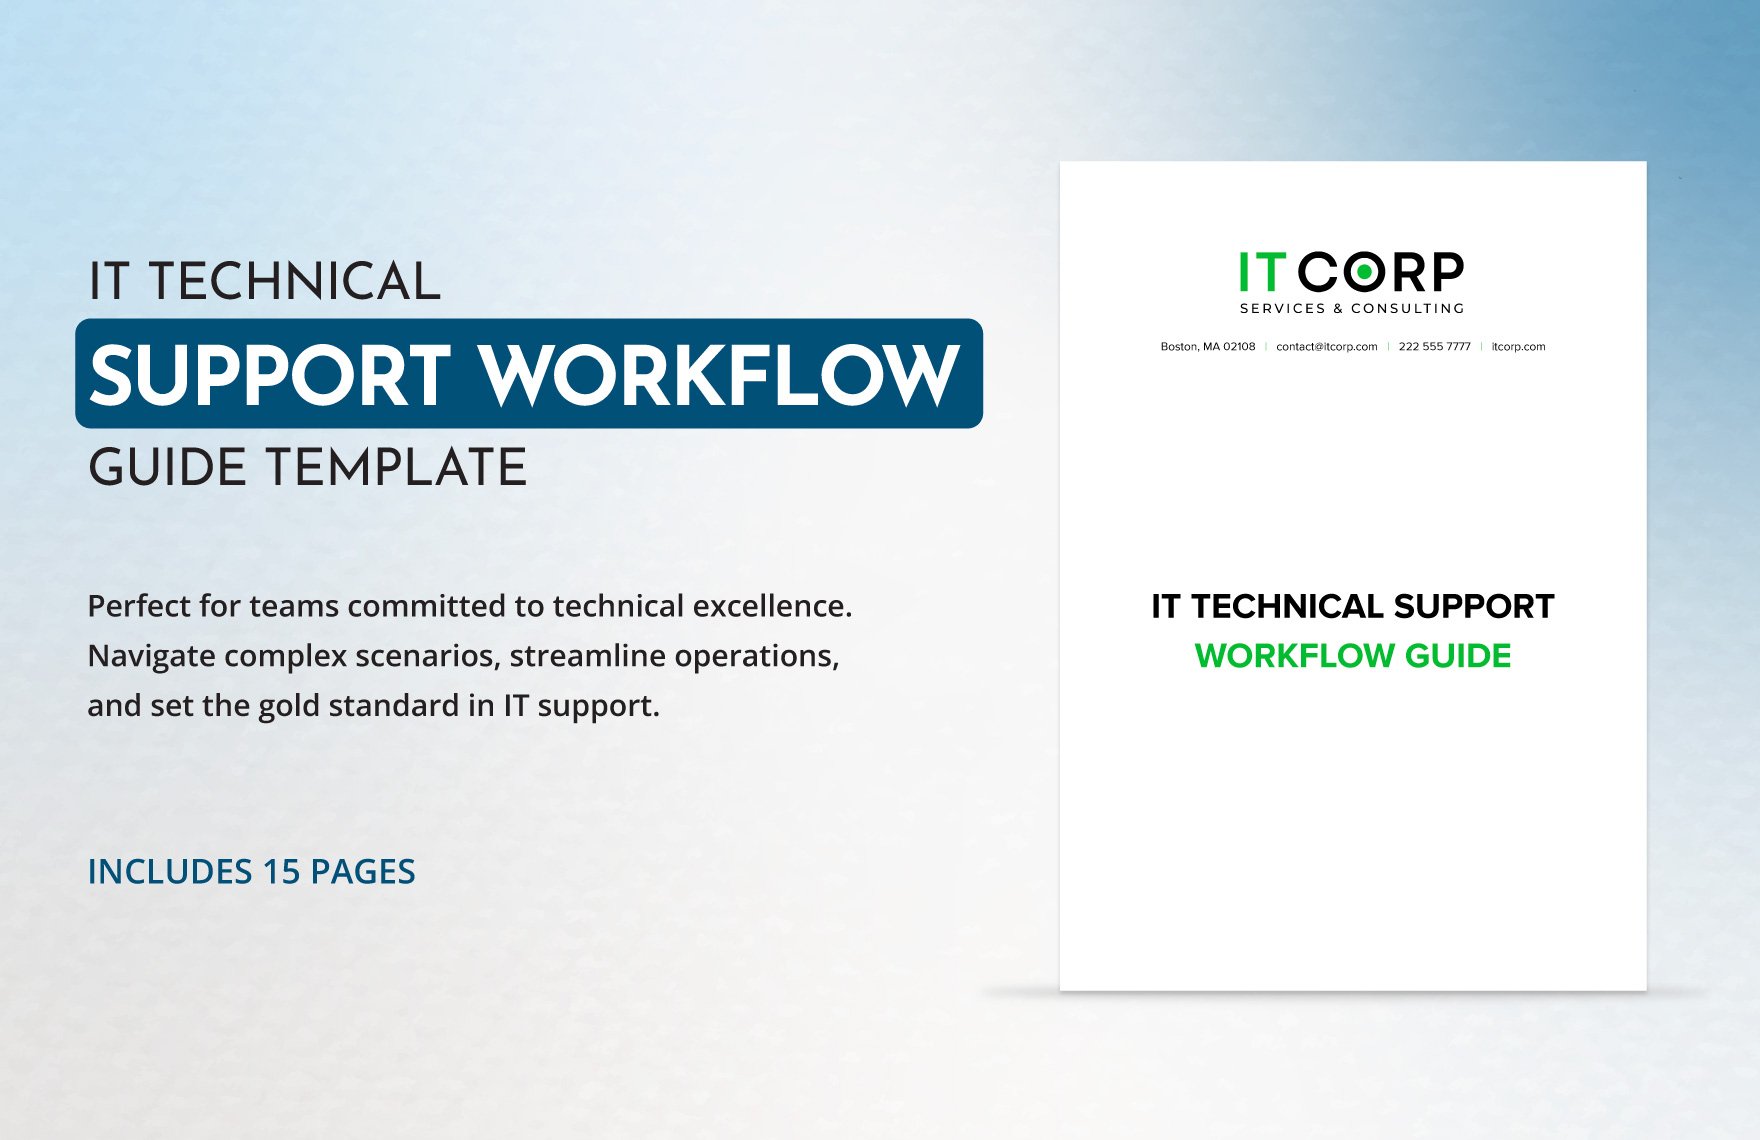 IT Technical Support Workflow Guide Template